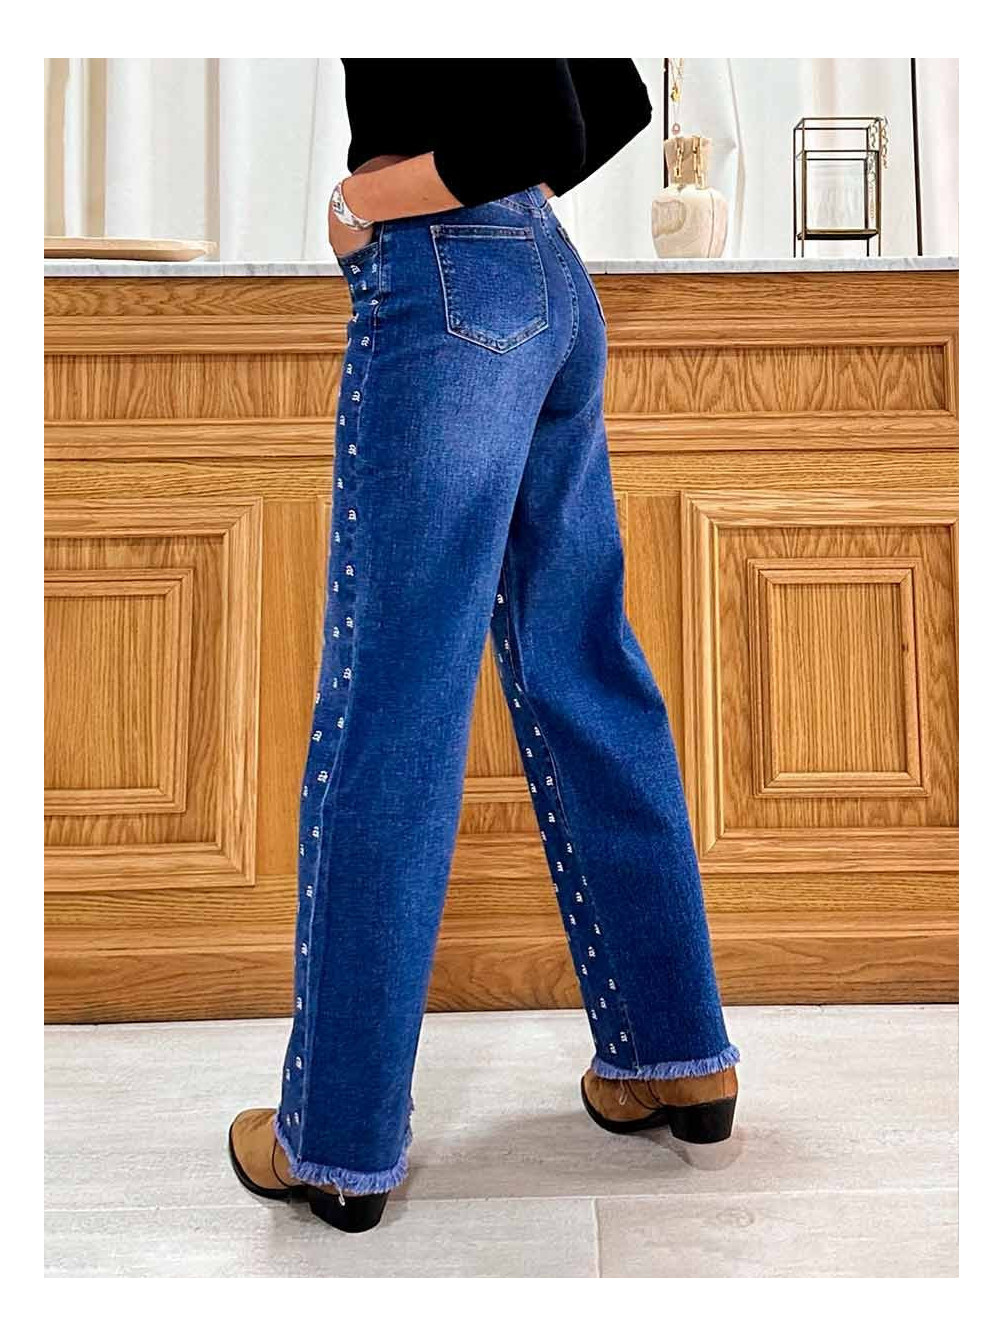 Jeans Strass, Jeans Mujer, Pantalones Mujer, Mariquita Trasquilá